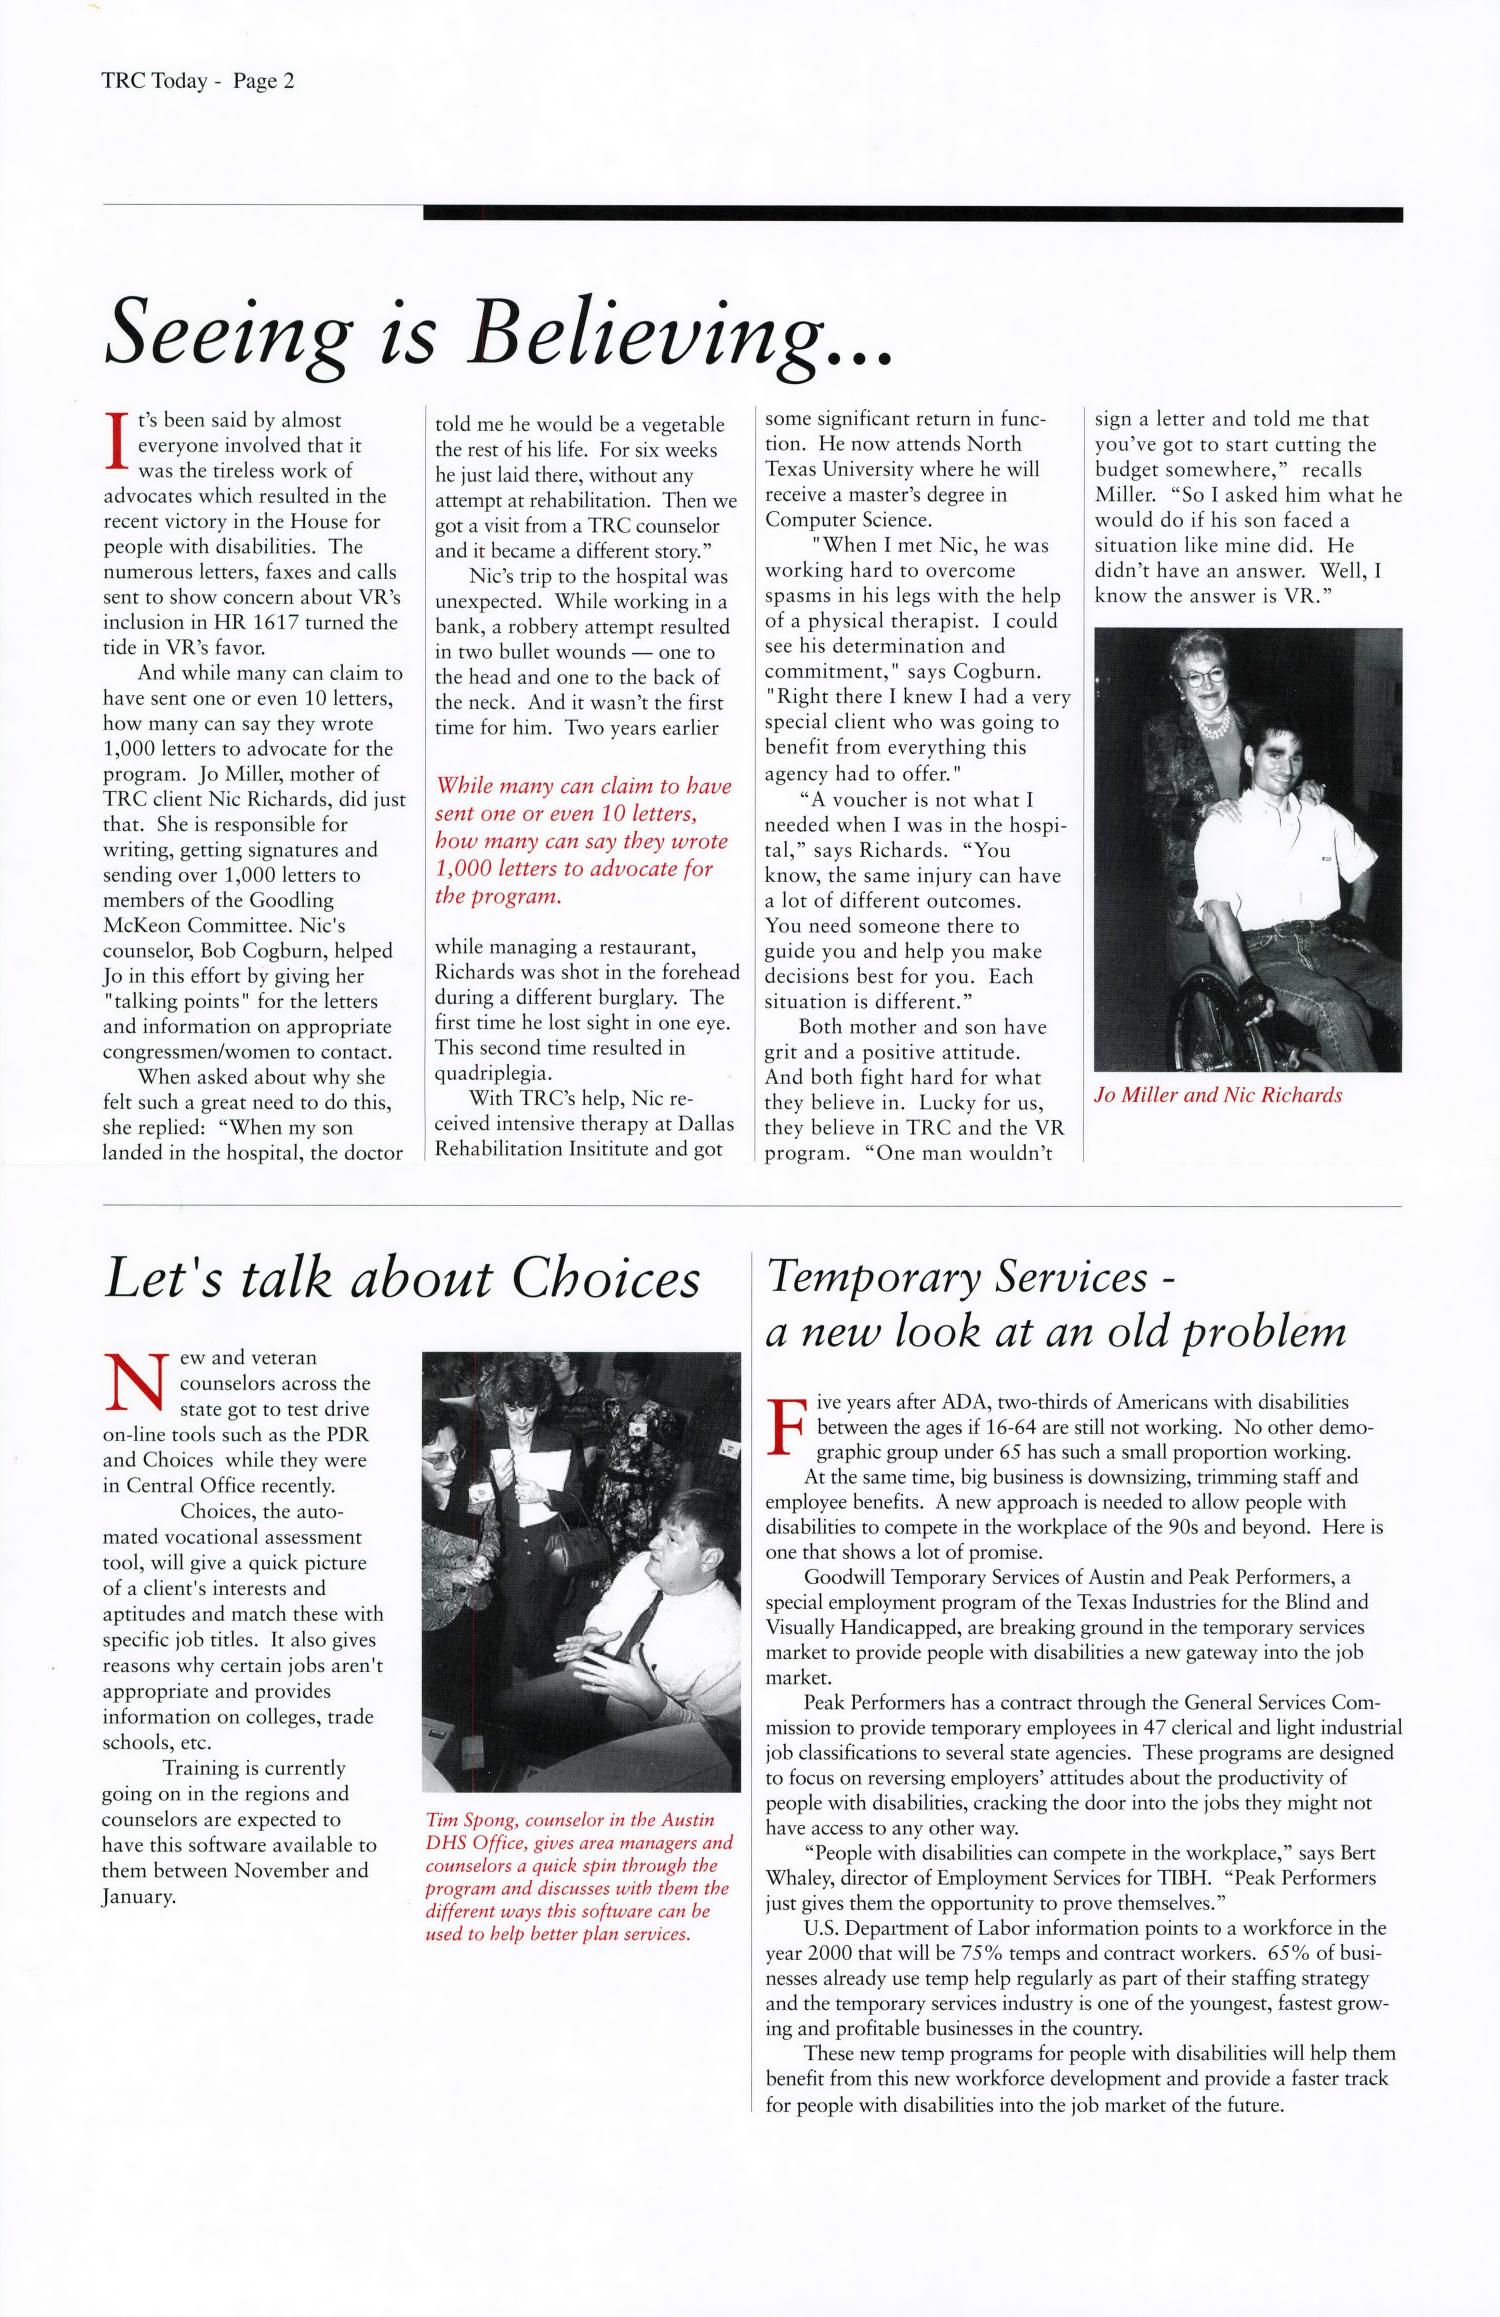 TRC Today, Volume 18, Number 9, October 1995
                                                
                                                    Page 2
                                                